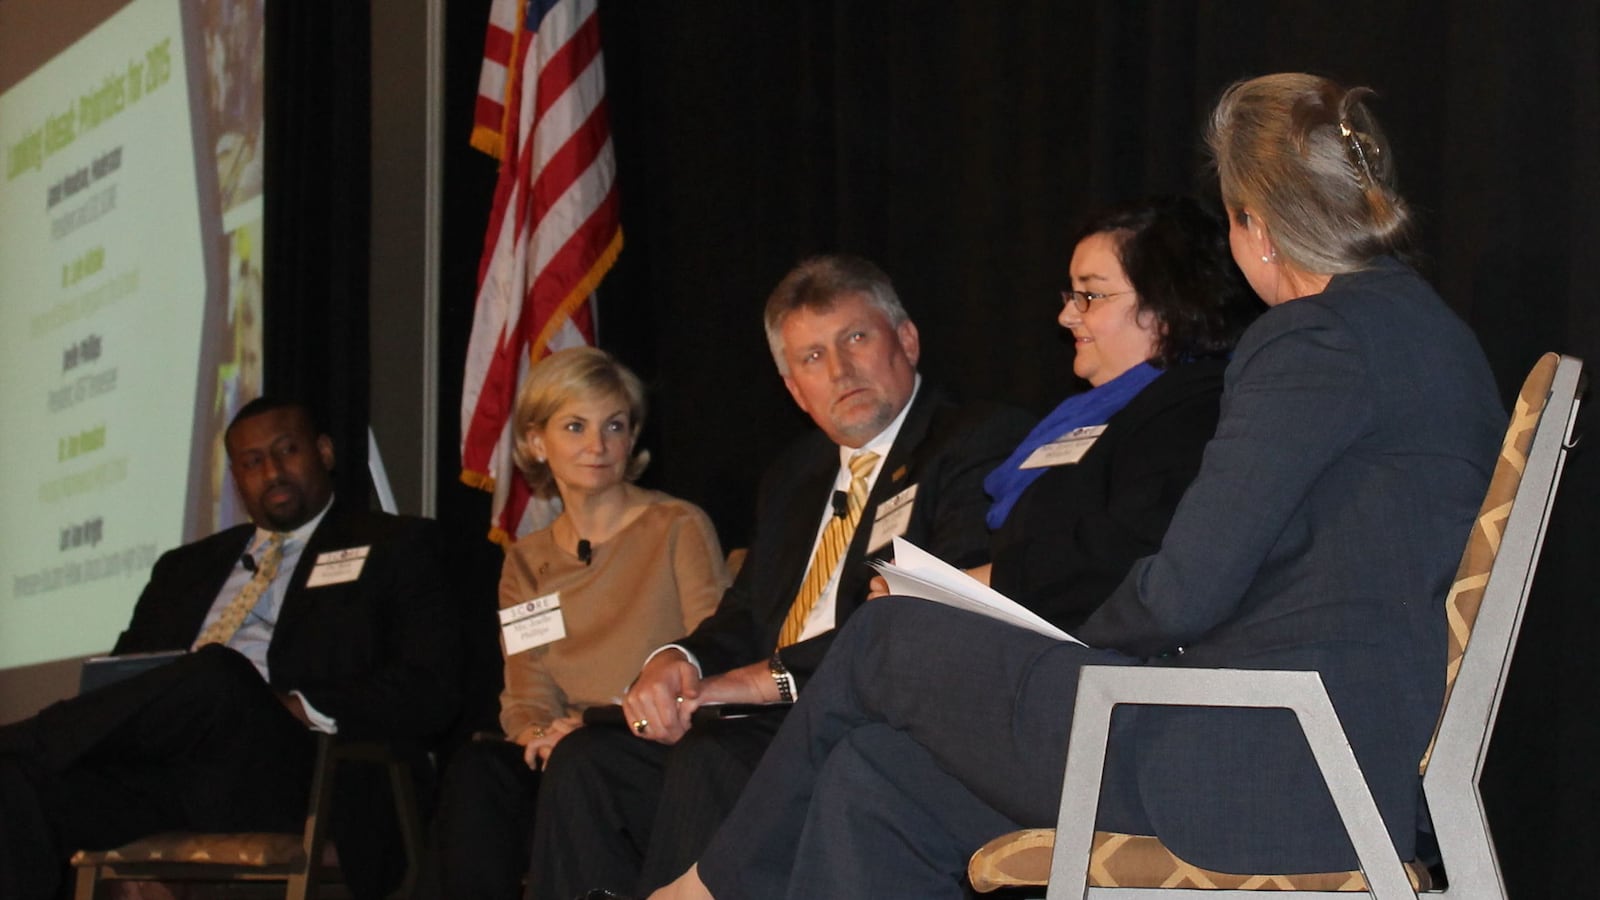 Lyle Ailshie (center) participates in a 2015 panel discussion on the state of education in Tennessee. The event was organized by the State Collaborative on Reforming Education when Ailshie was superintendent of schools in Kingsport.